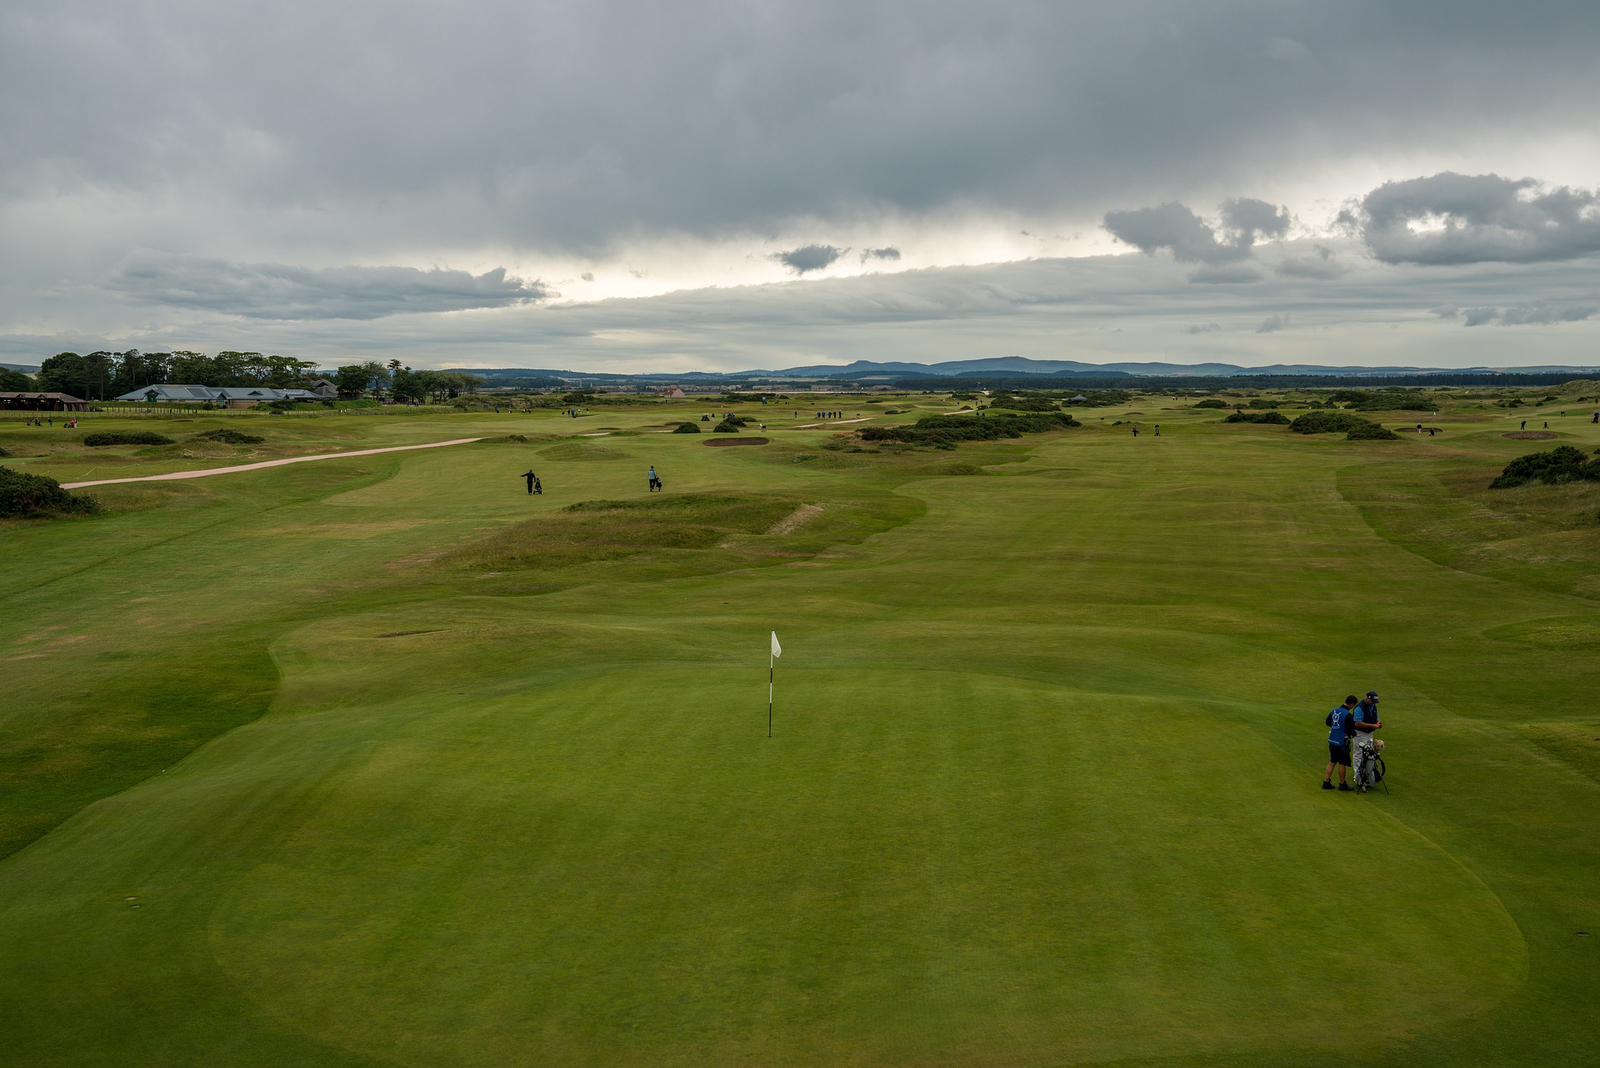 Taking a Successful Buddies Golf Trip to Scotland: A Guide to Unforgettable Links Golf